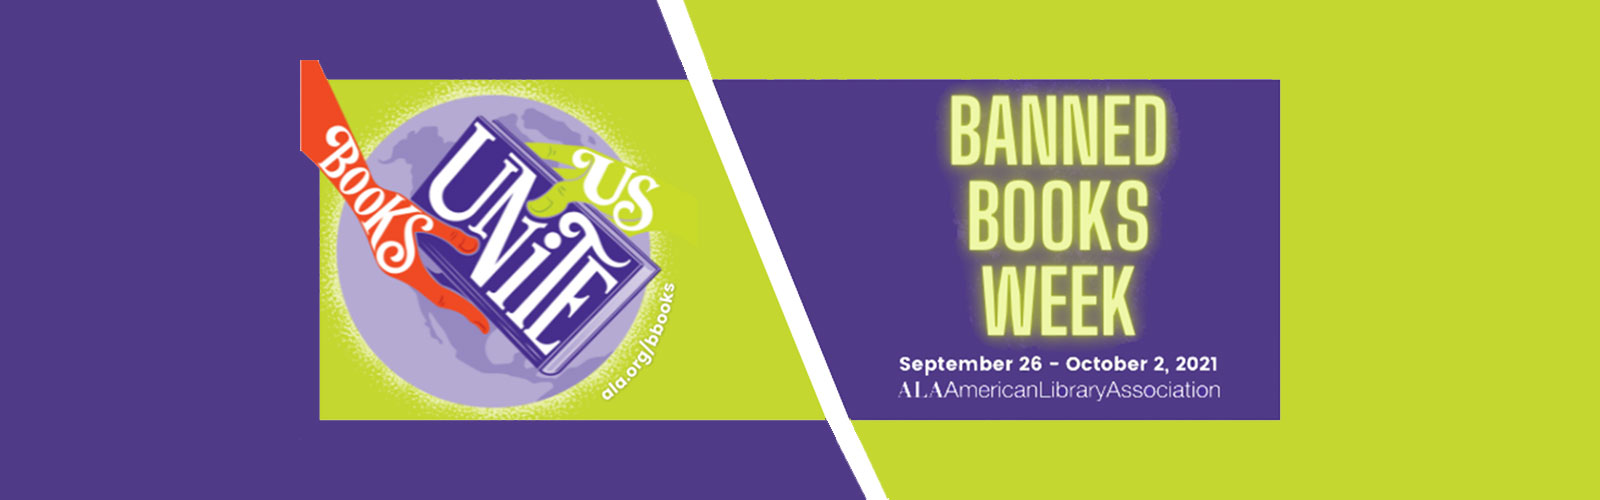 2021 Banned Books Week Banner